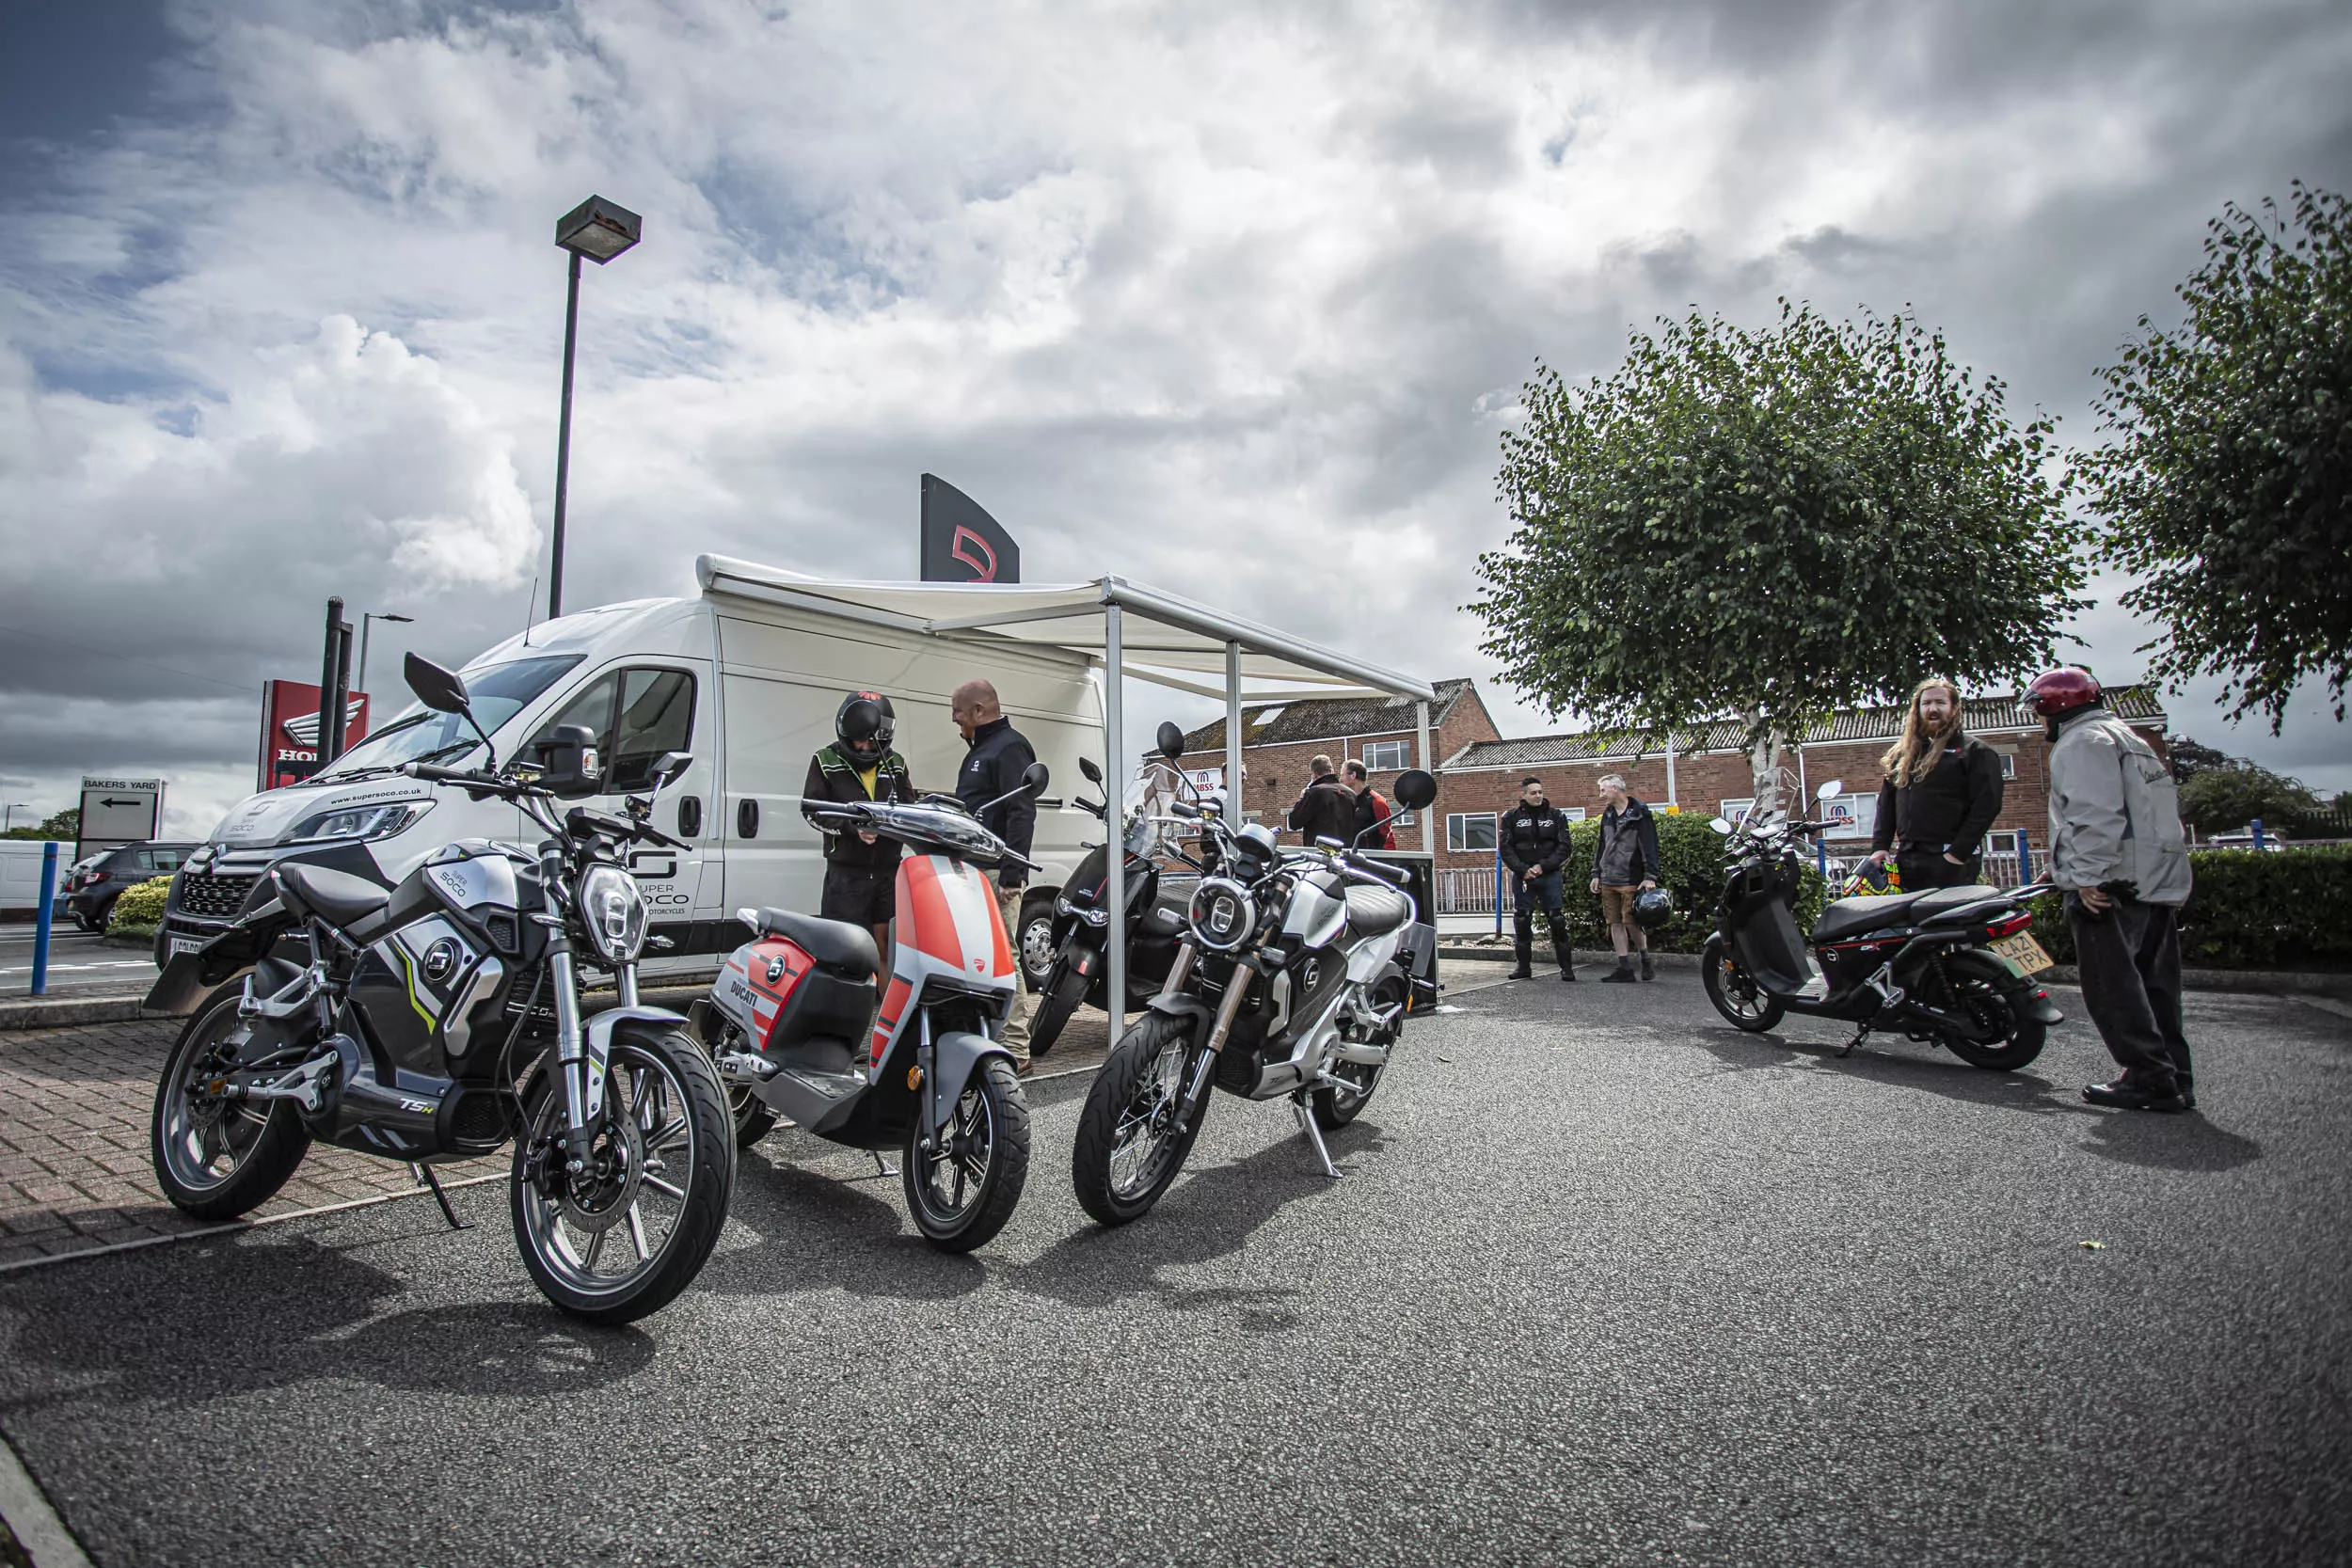 North London Motorcycle Training in United Kingdom, Europe | Motorcycles - Rated 4.1